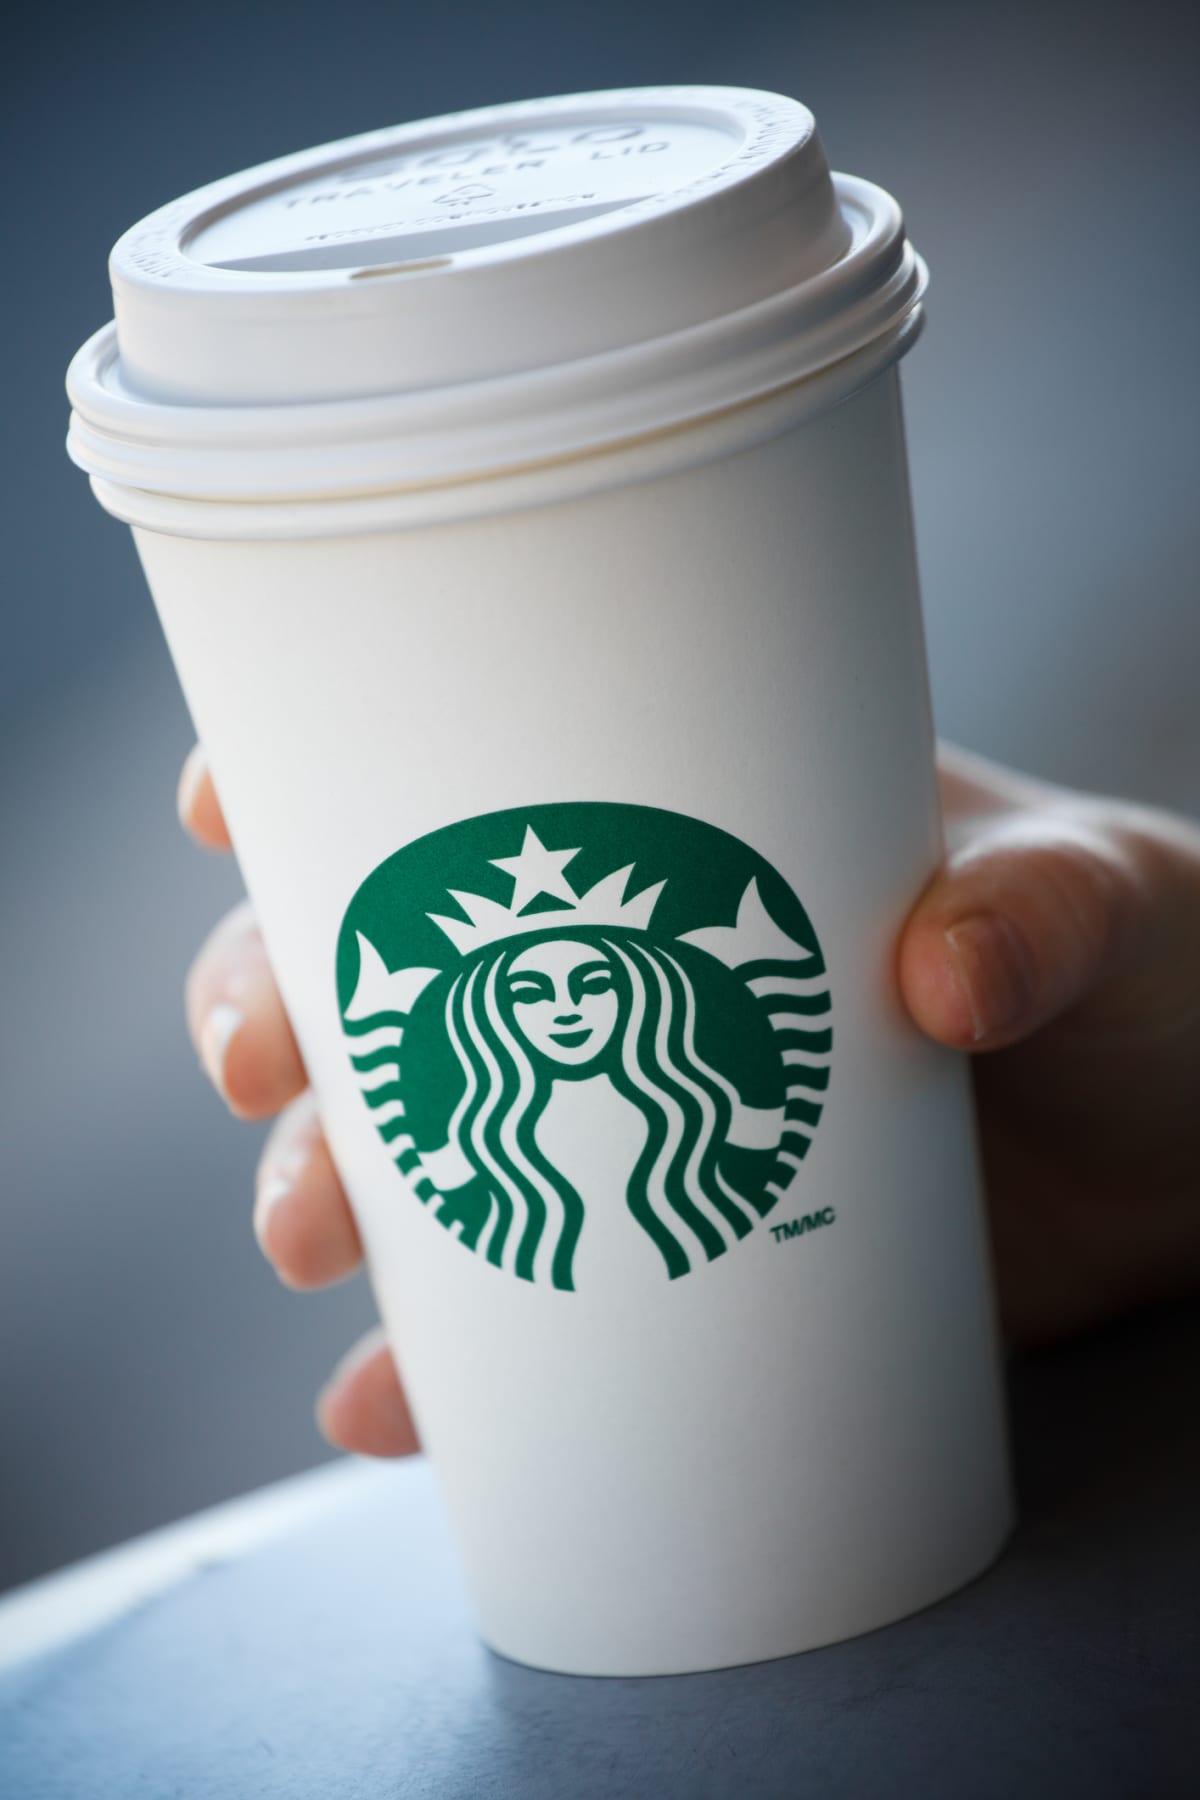 "Bedford, Nova Scotia, Canada - July 3, 2011: A  human hand holding a grande sized Starbucks to go coffee cup sitting on a table outside. Starbucks is a very popular International Coffeehouse franchise with over 15,000 locations in 50 countries"